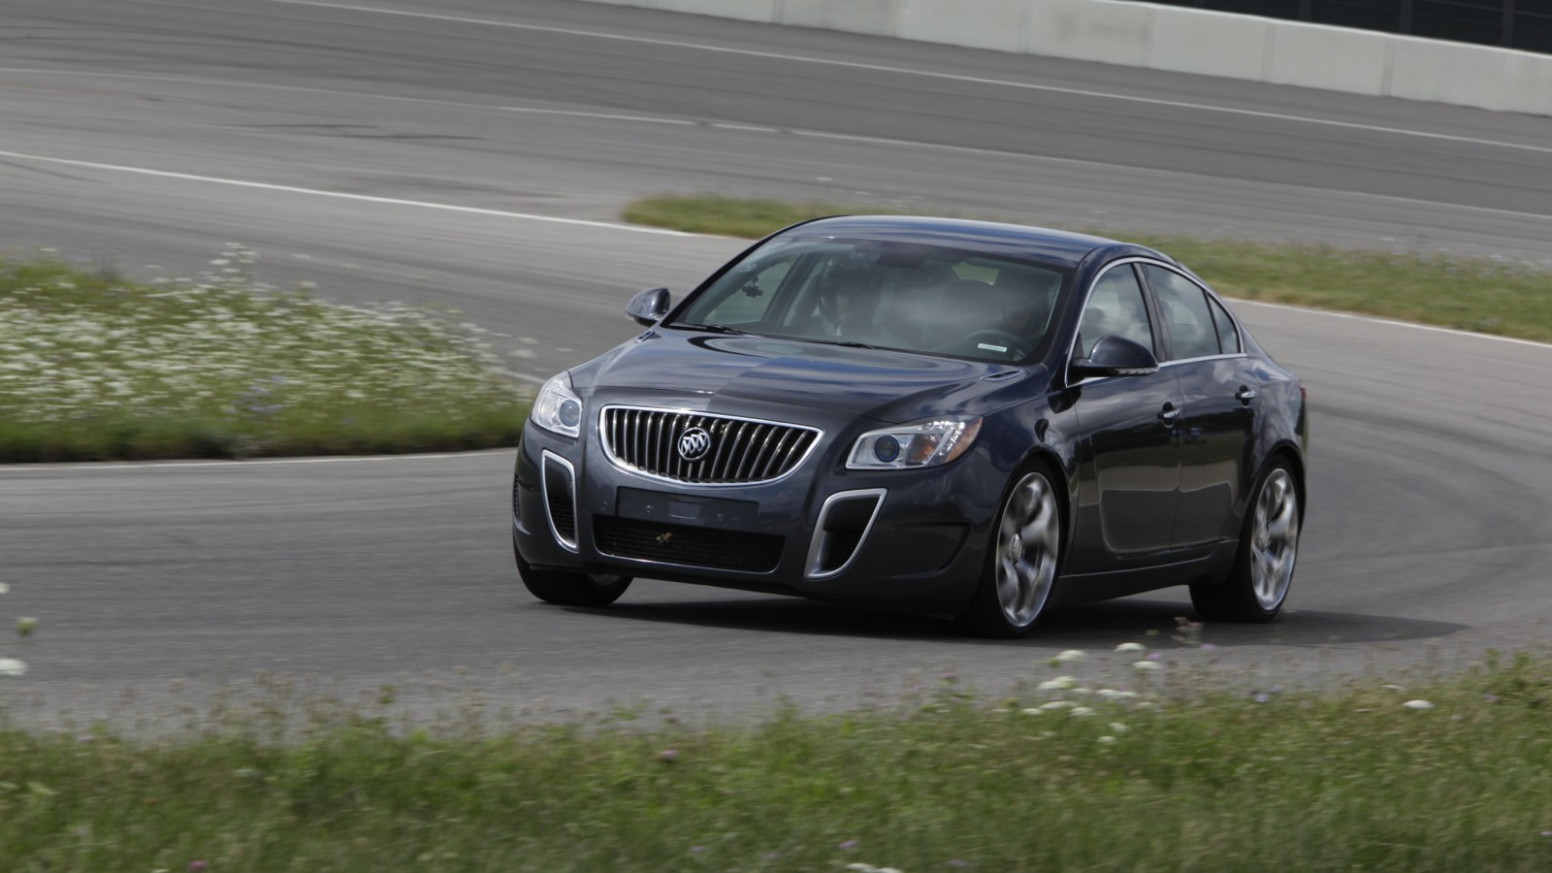 History 2022 Buick Regal Gs Coupe